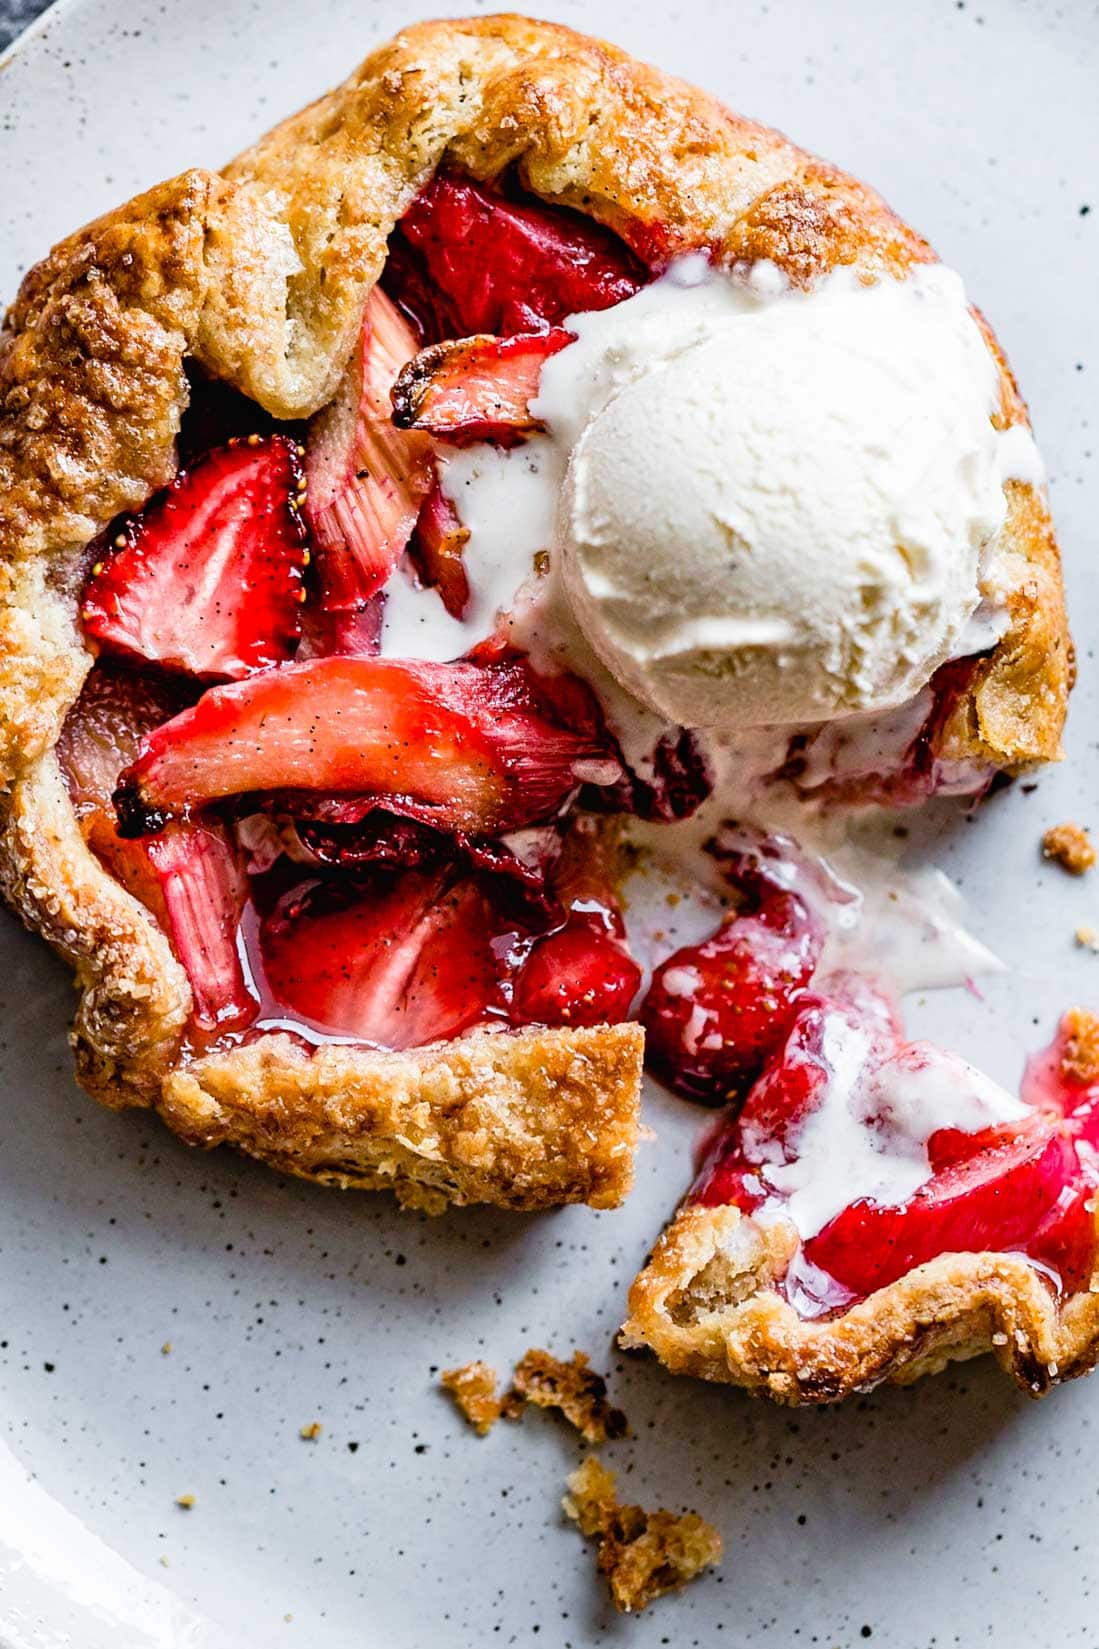 A very sexy close-up of a berry rhubarb galette showing flaky AF crust, gooey fruit, and a scoop of melty ice cream